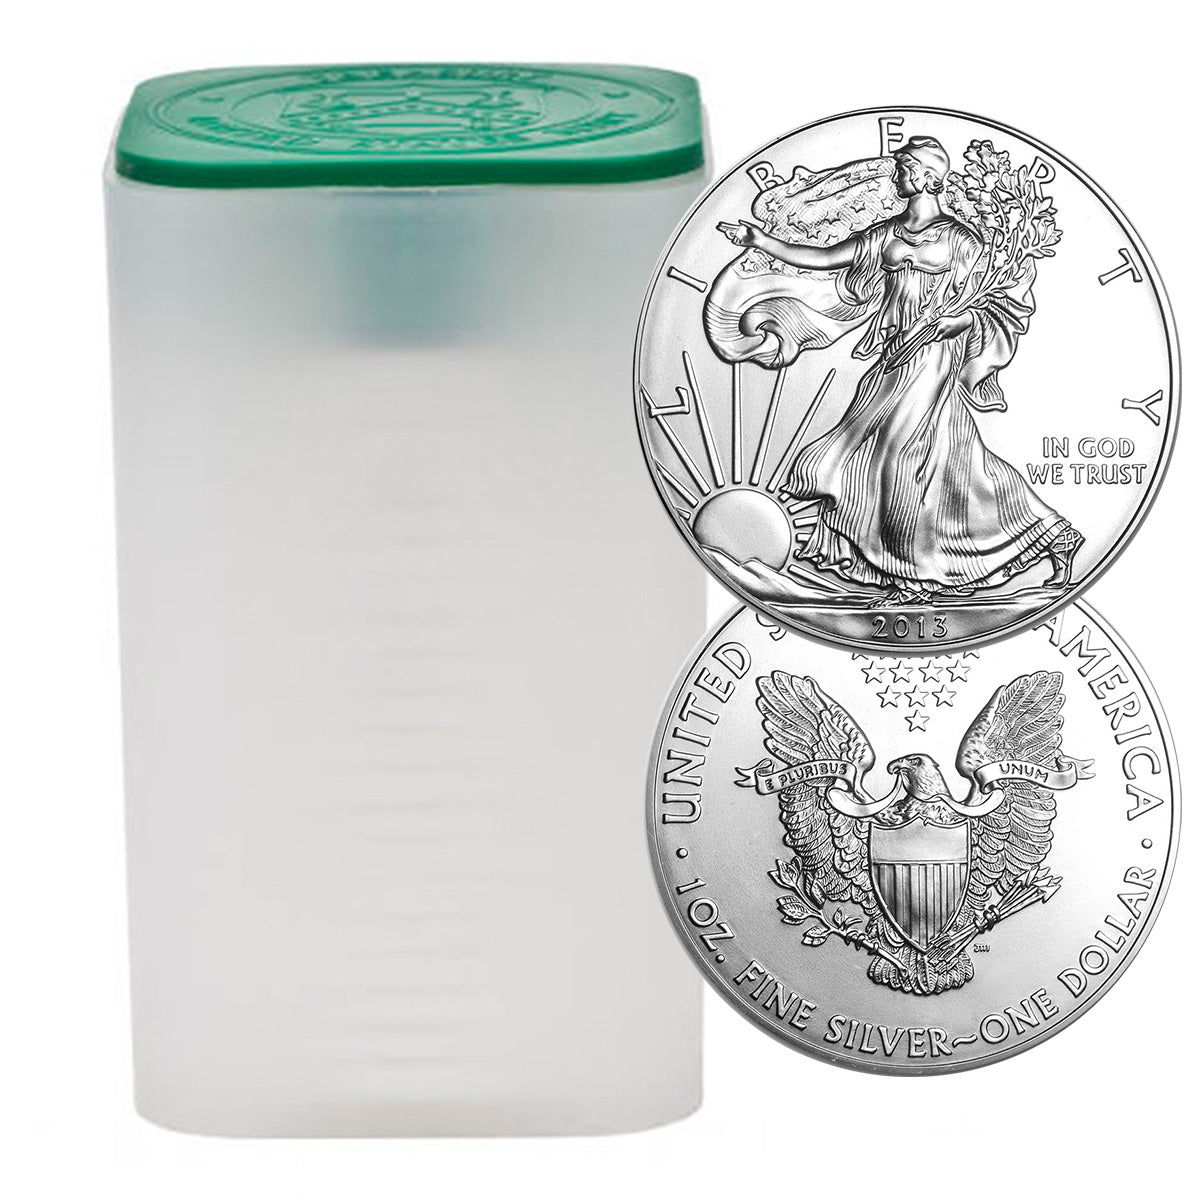 Tube of 2013 1 oz American Silver Eagles (20 Coins)